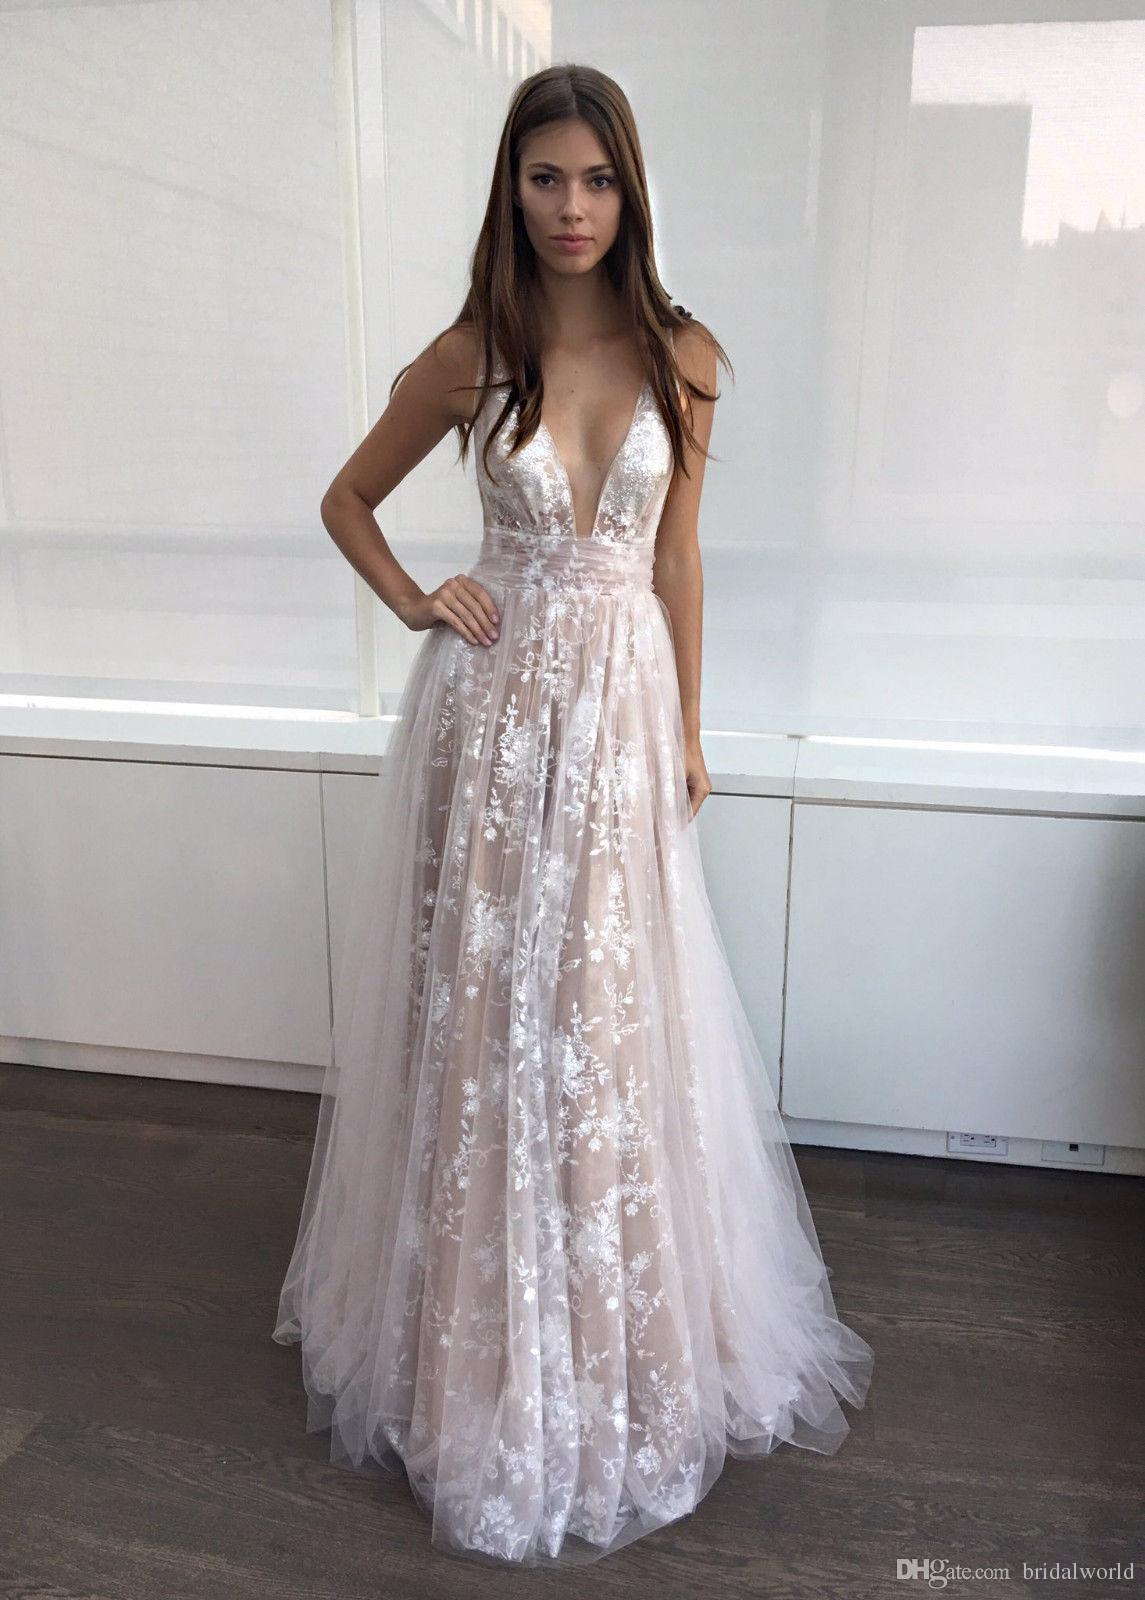 White Lace Prom Dress sexy evening dresses plunging neck lace prom dress with v back formal dress  a XUCIVUG